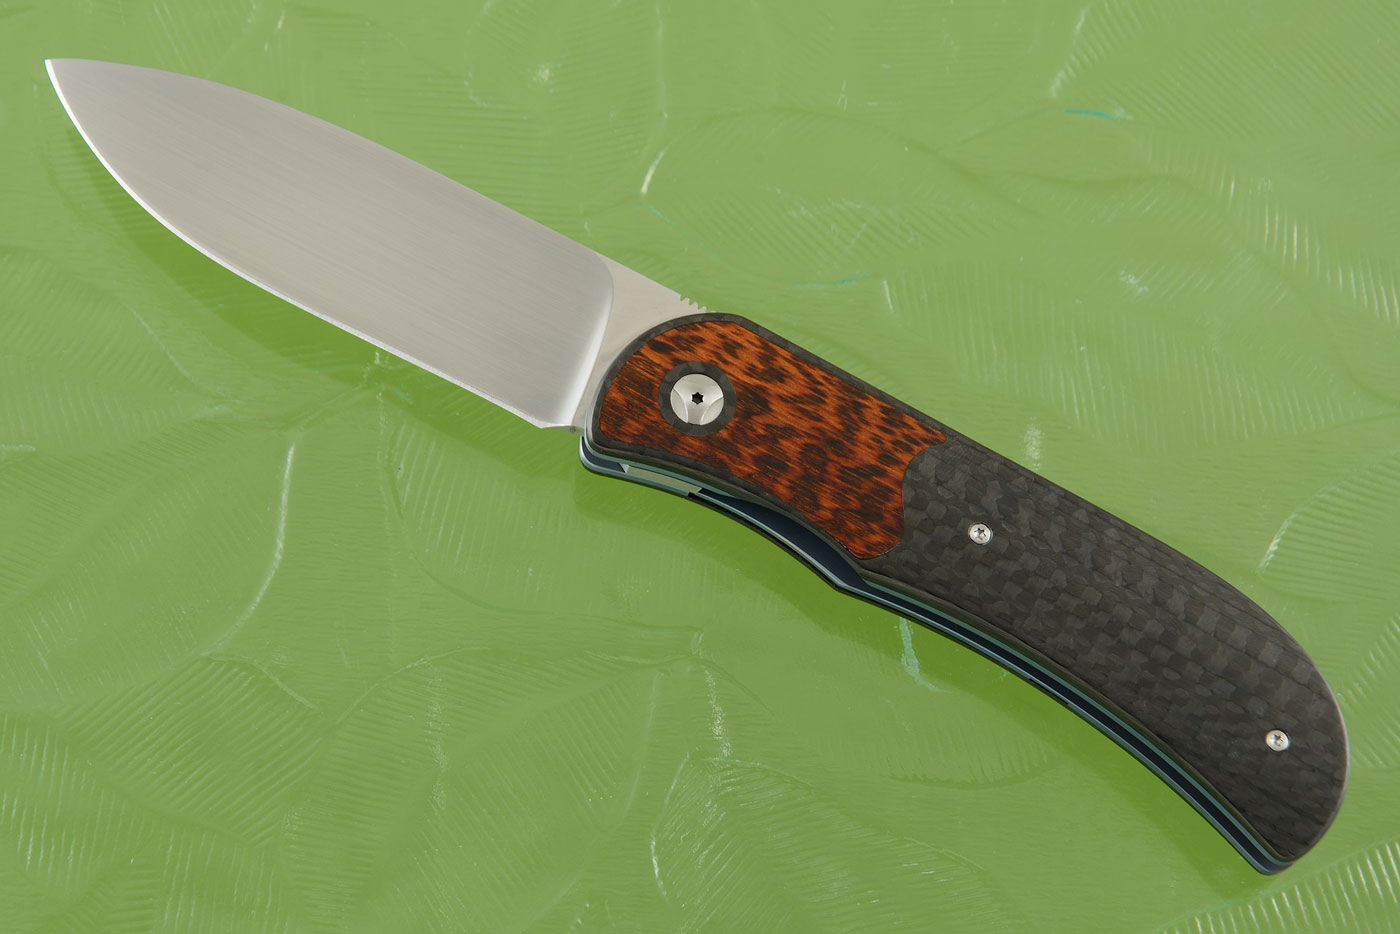 LEXK Plus Front Flipper with Carbon Fiber and Snakewood (Ceramic IKBS)